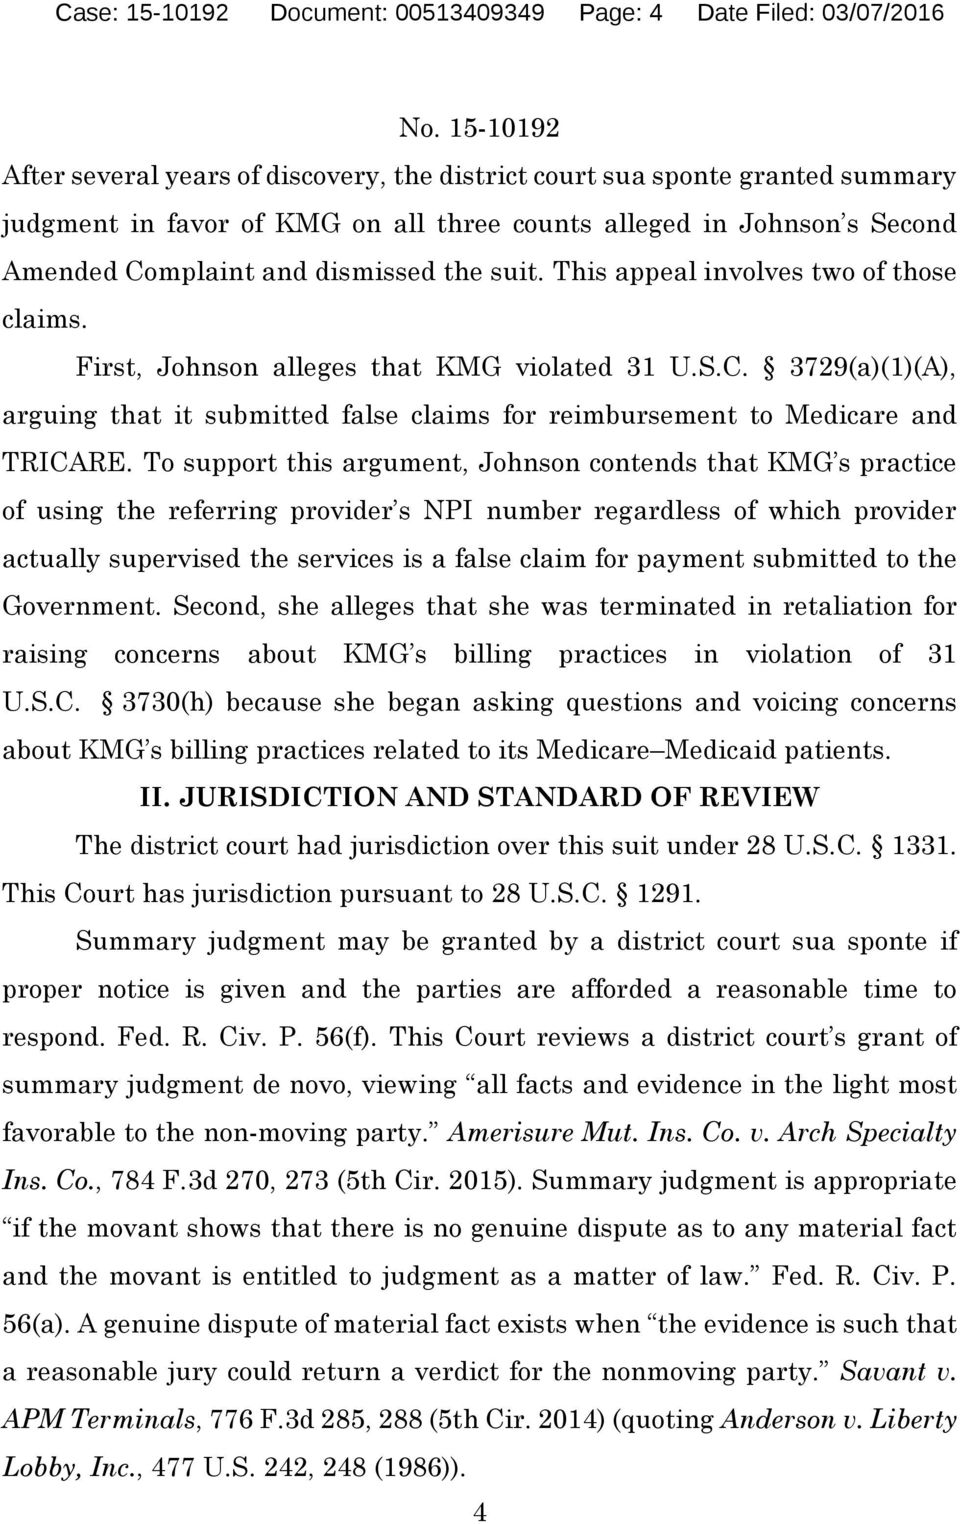 To support this argument, Johnson contends that KMG s practice of using the referring provider s NPI number regardless of which provider actually supervised the services is a false claim for payment